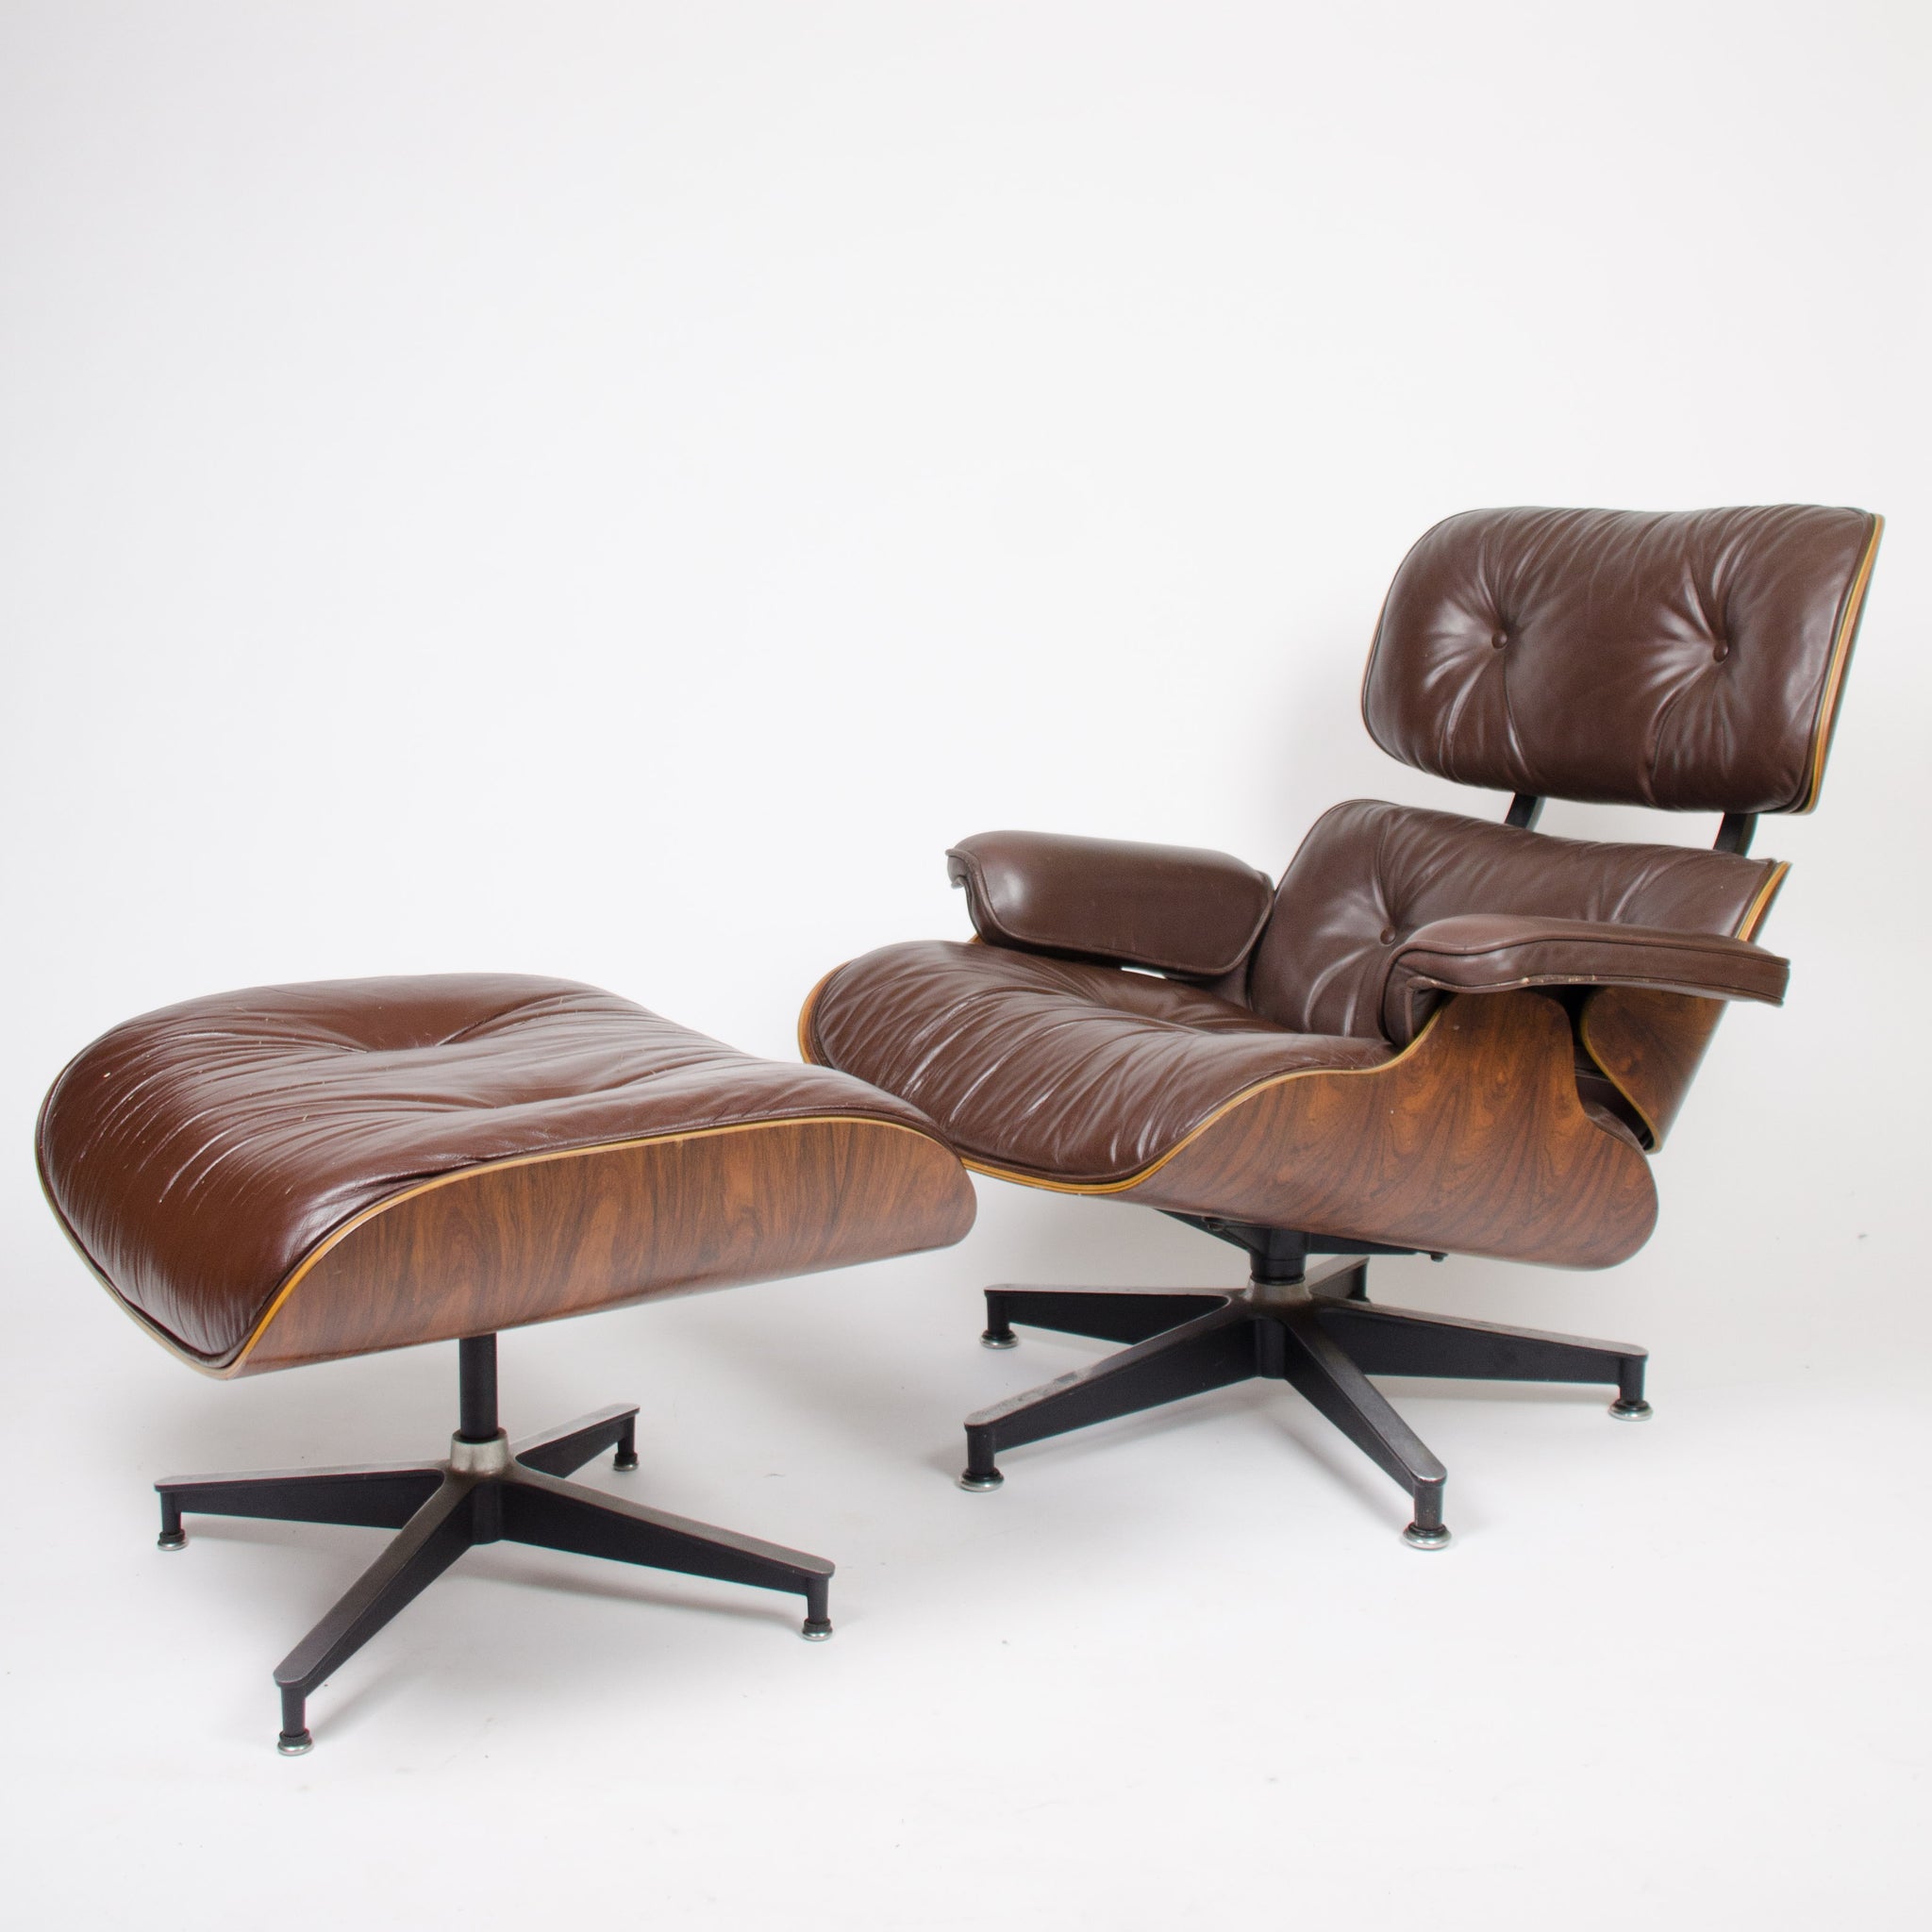 SOLD 1973 Herman Miller Eames Lounge Chair & Ottoman Rosewood 670 671 Brown Leather